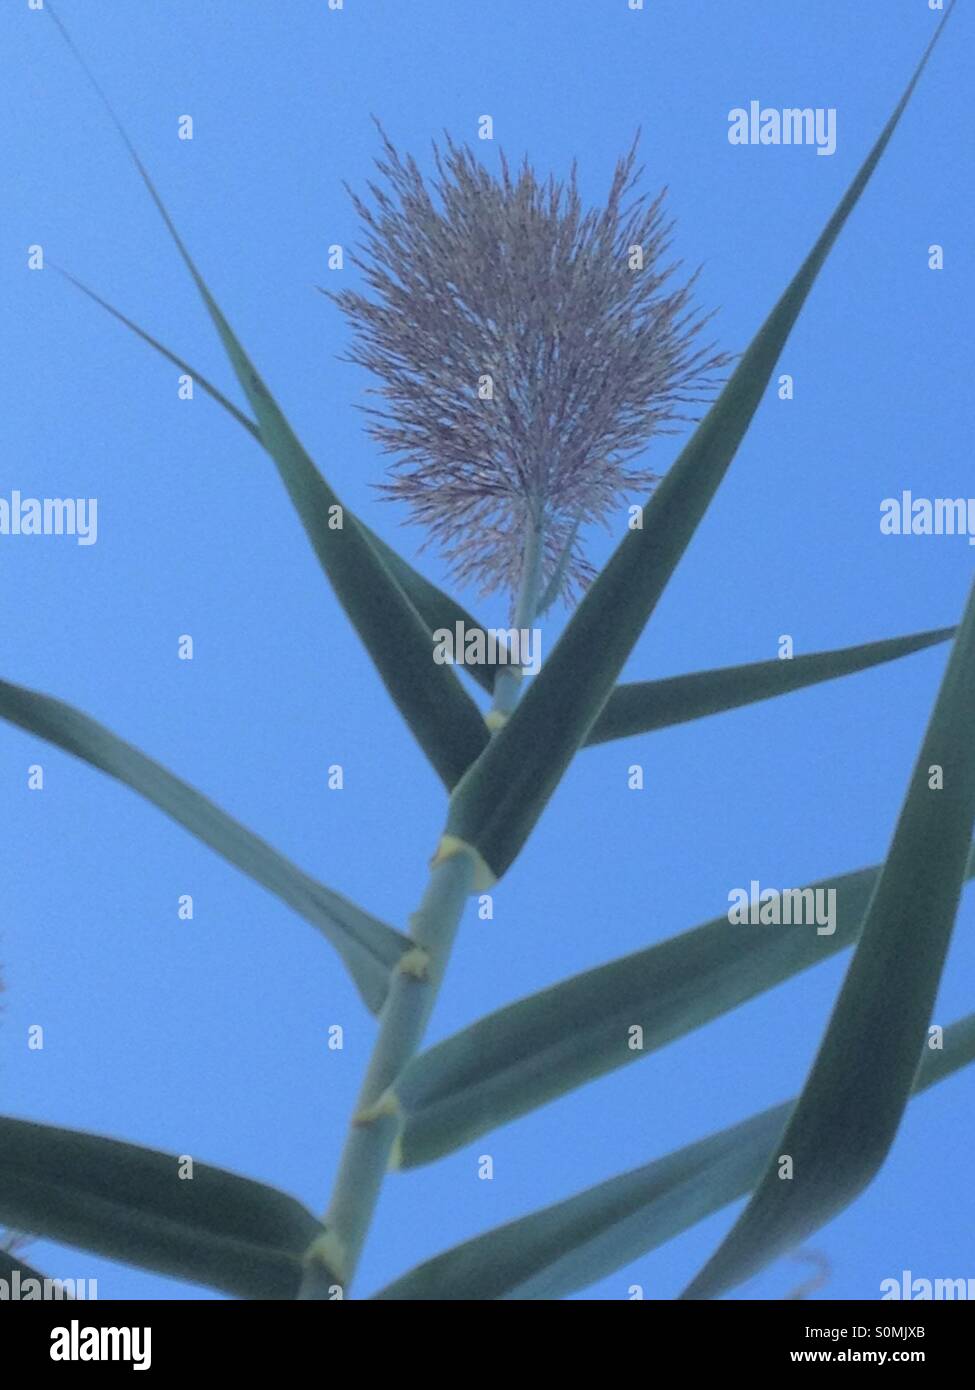 Plant stem, leaves and head from underneath Stock Photo